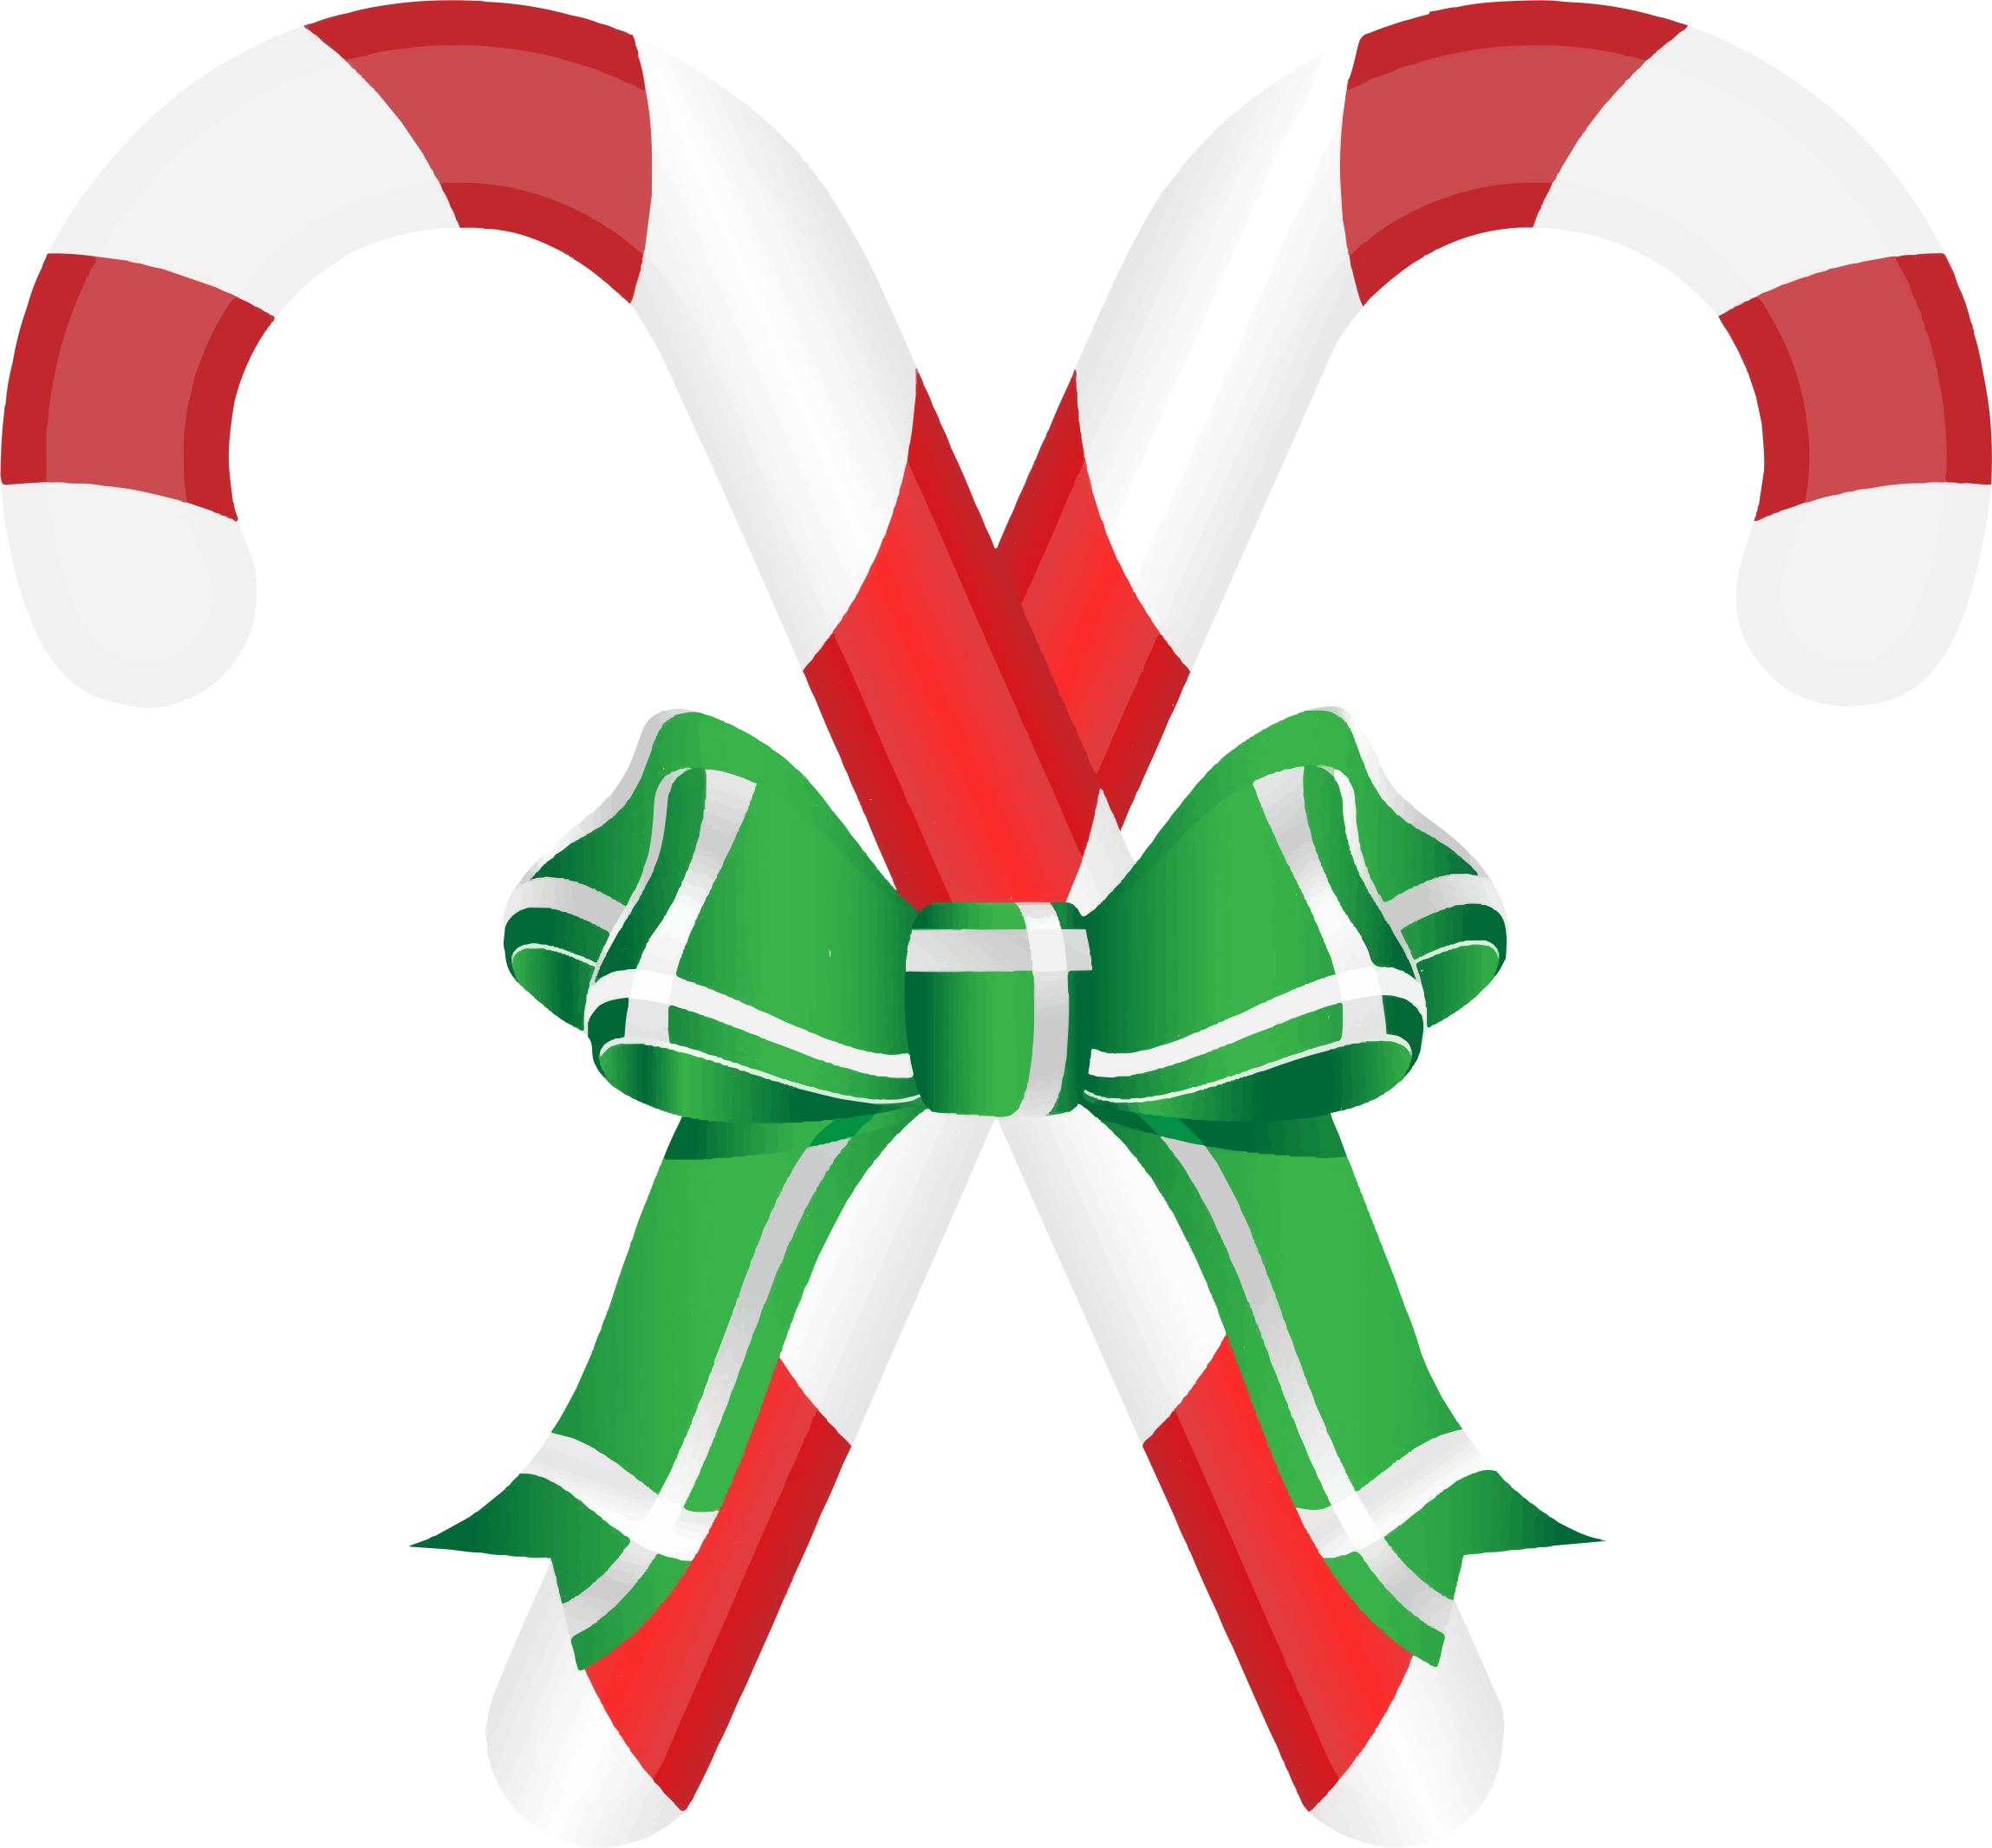 Download PNG image - Candy Cane PNG Free Download 